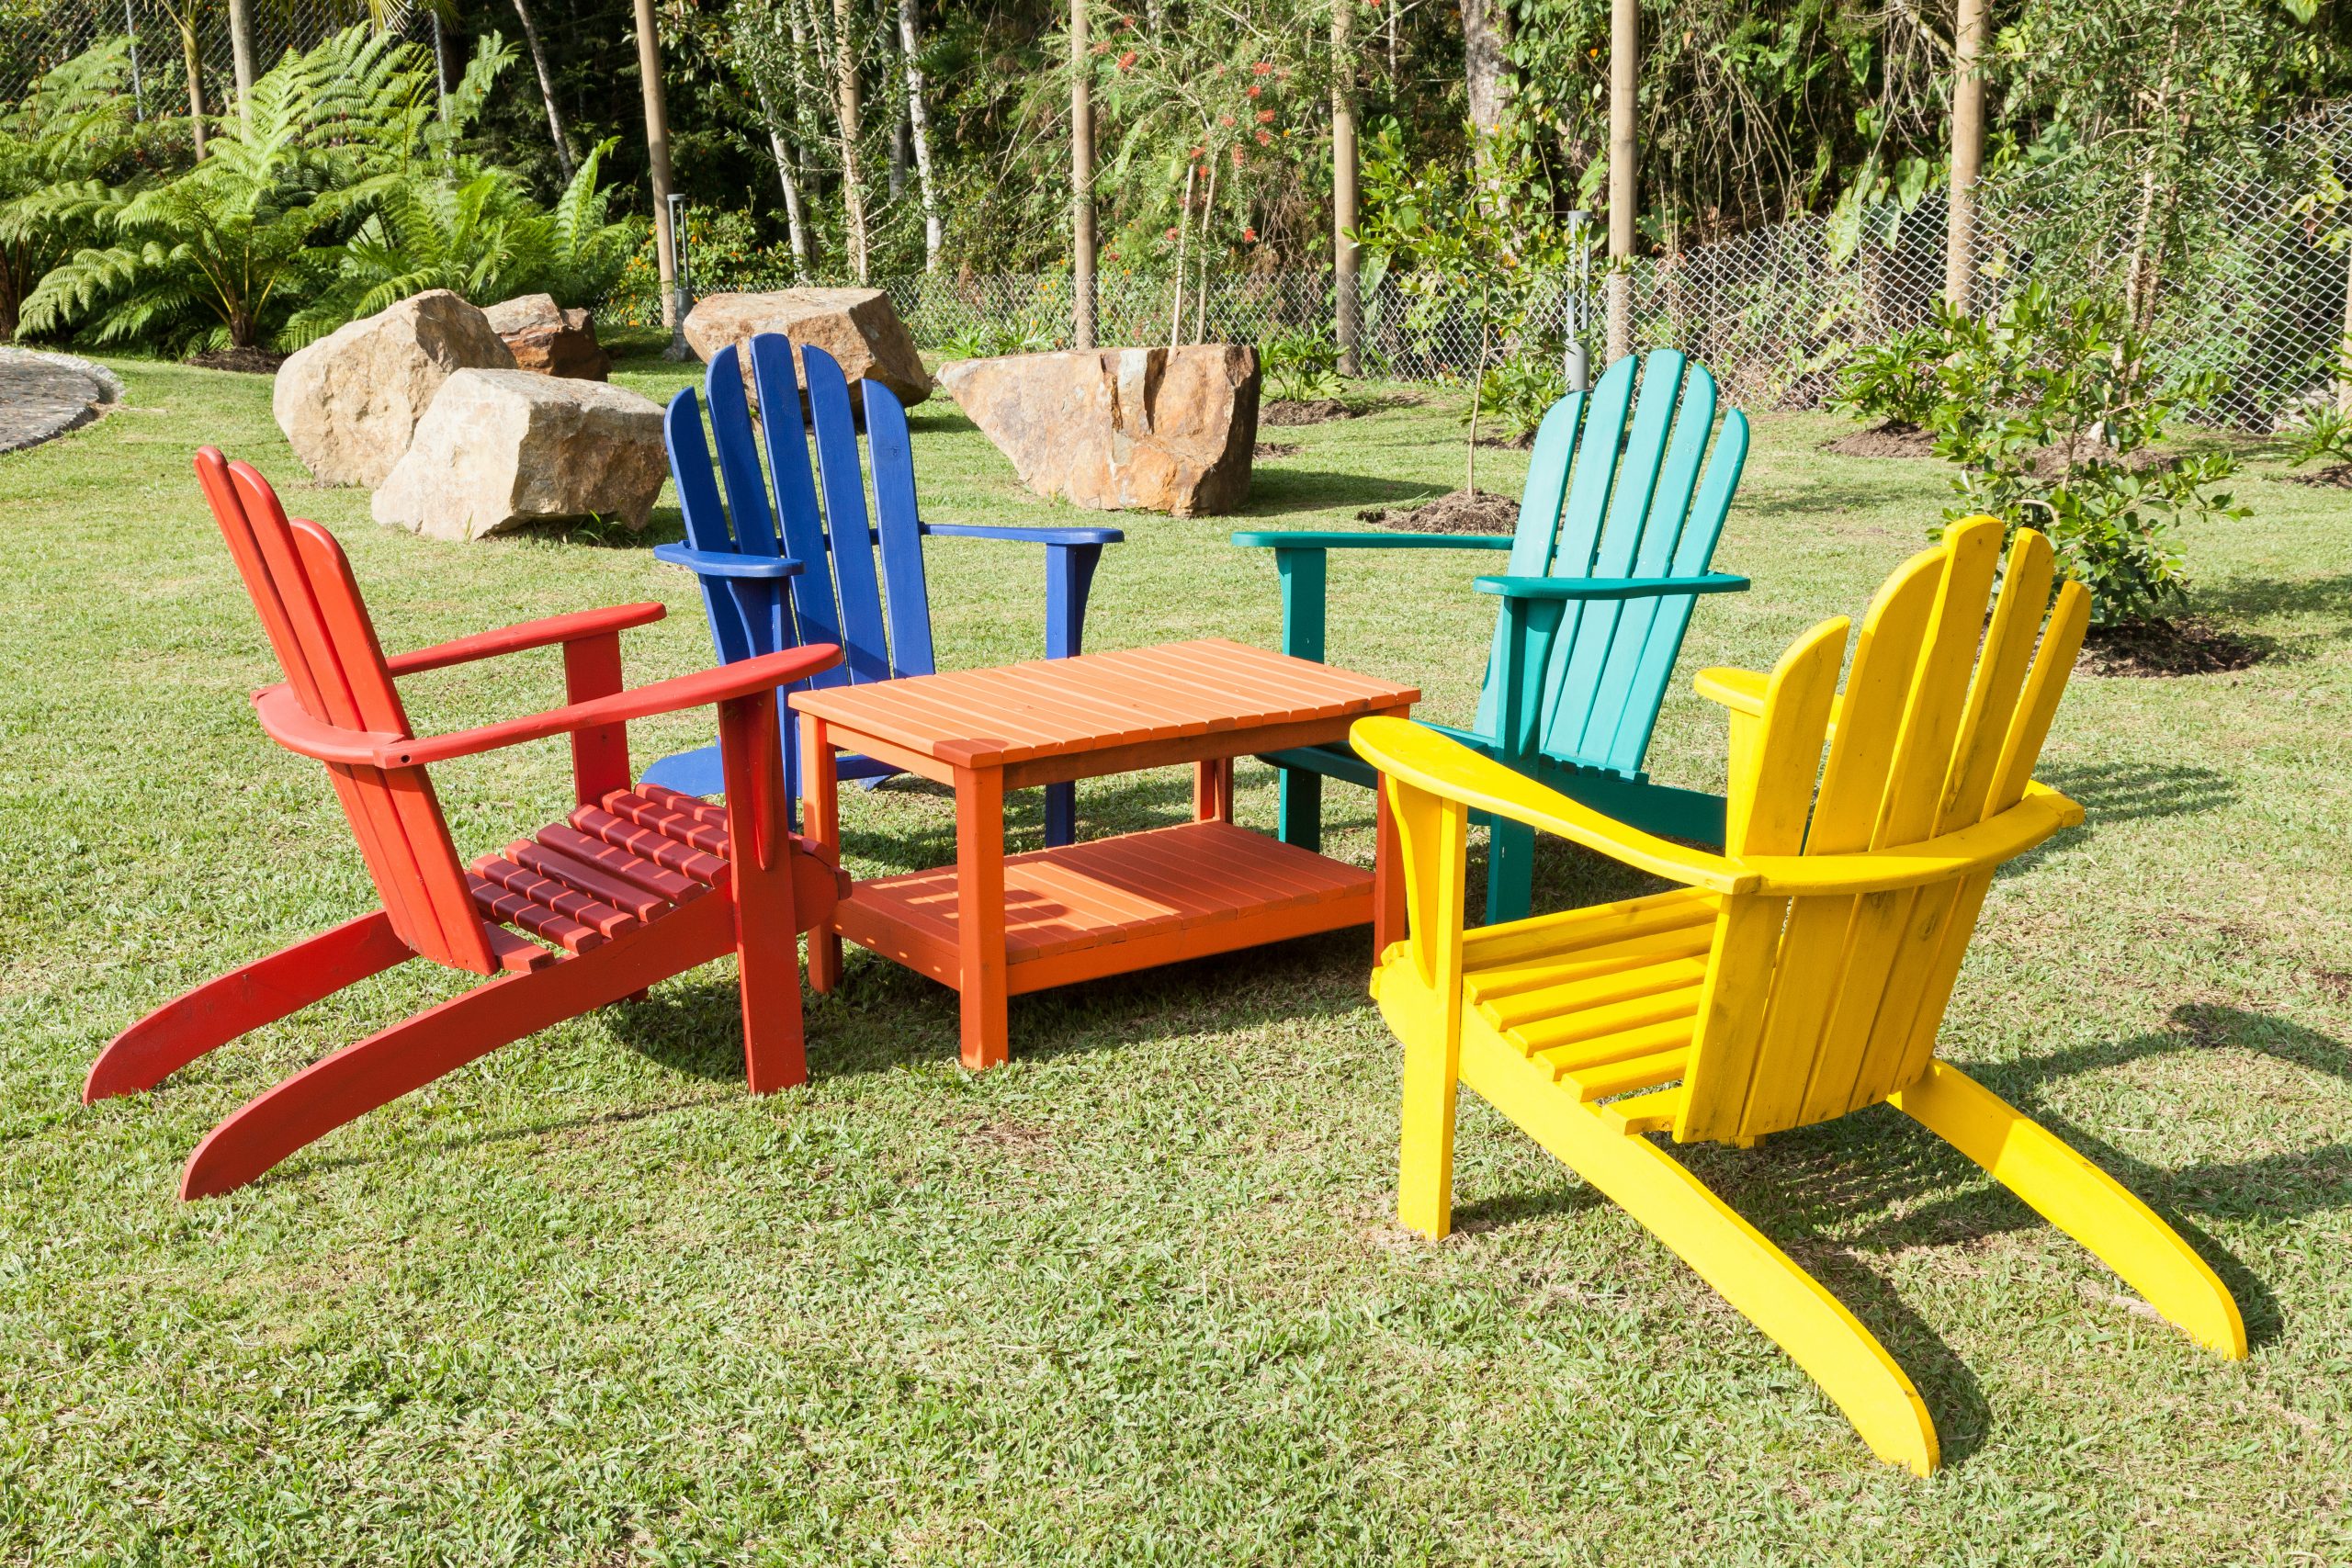 How To Clean Your Patio Furniture